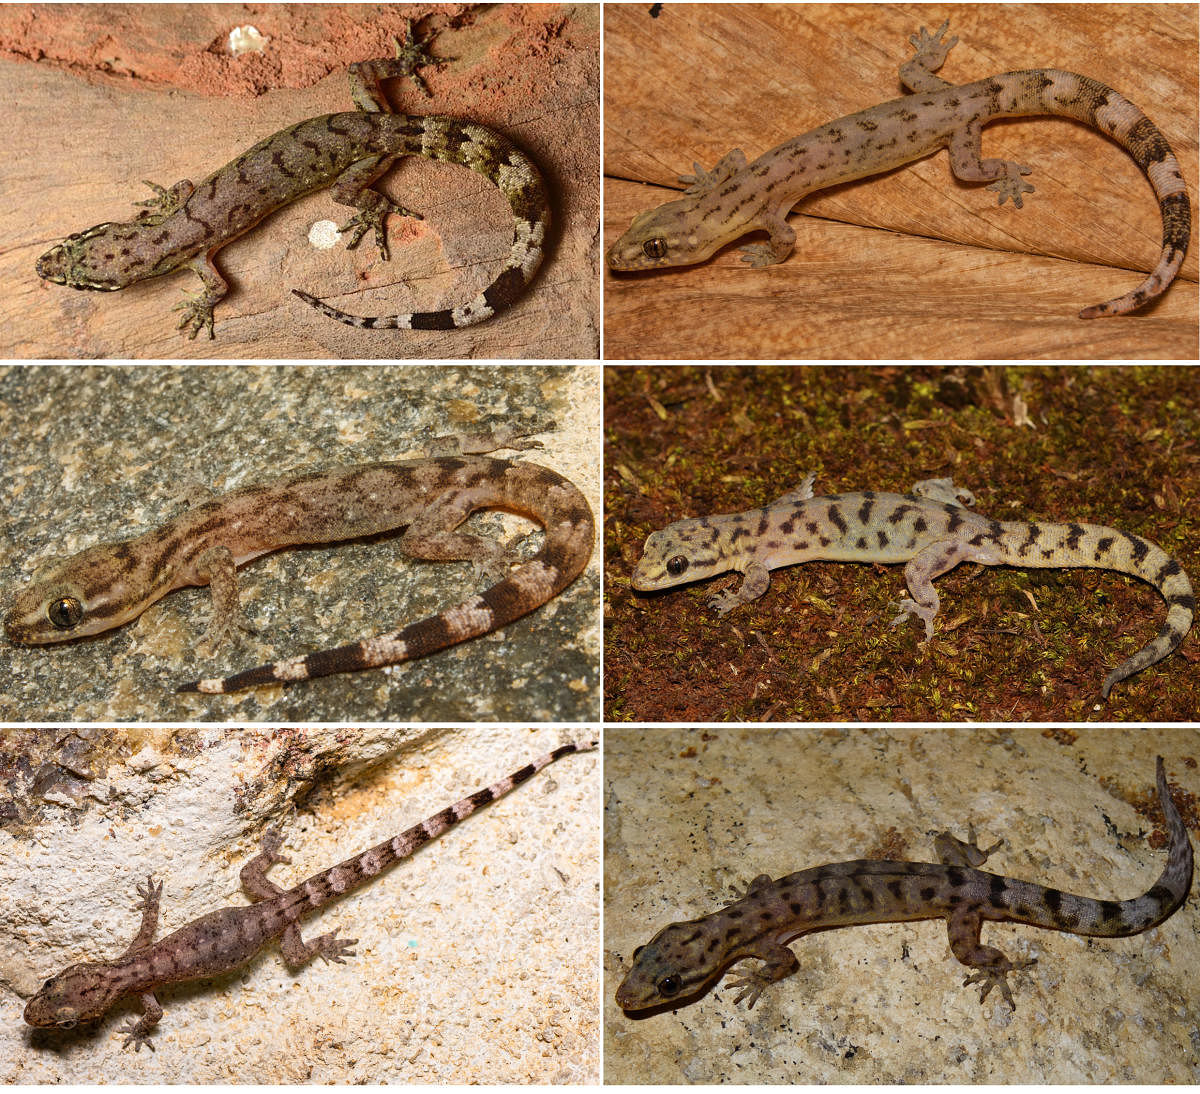 Six new species of lizards discovered from India